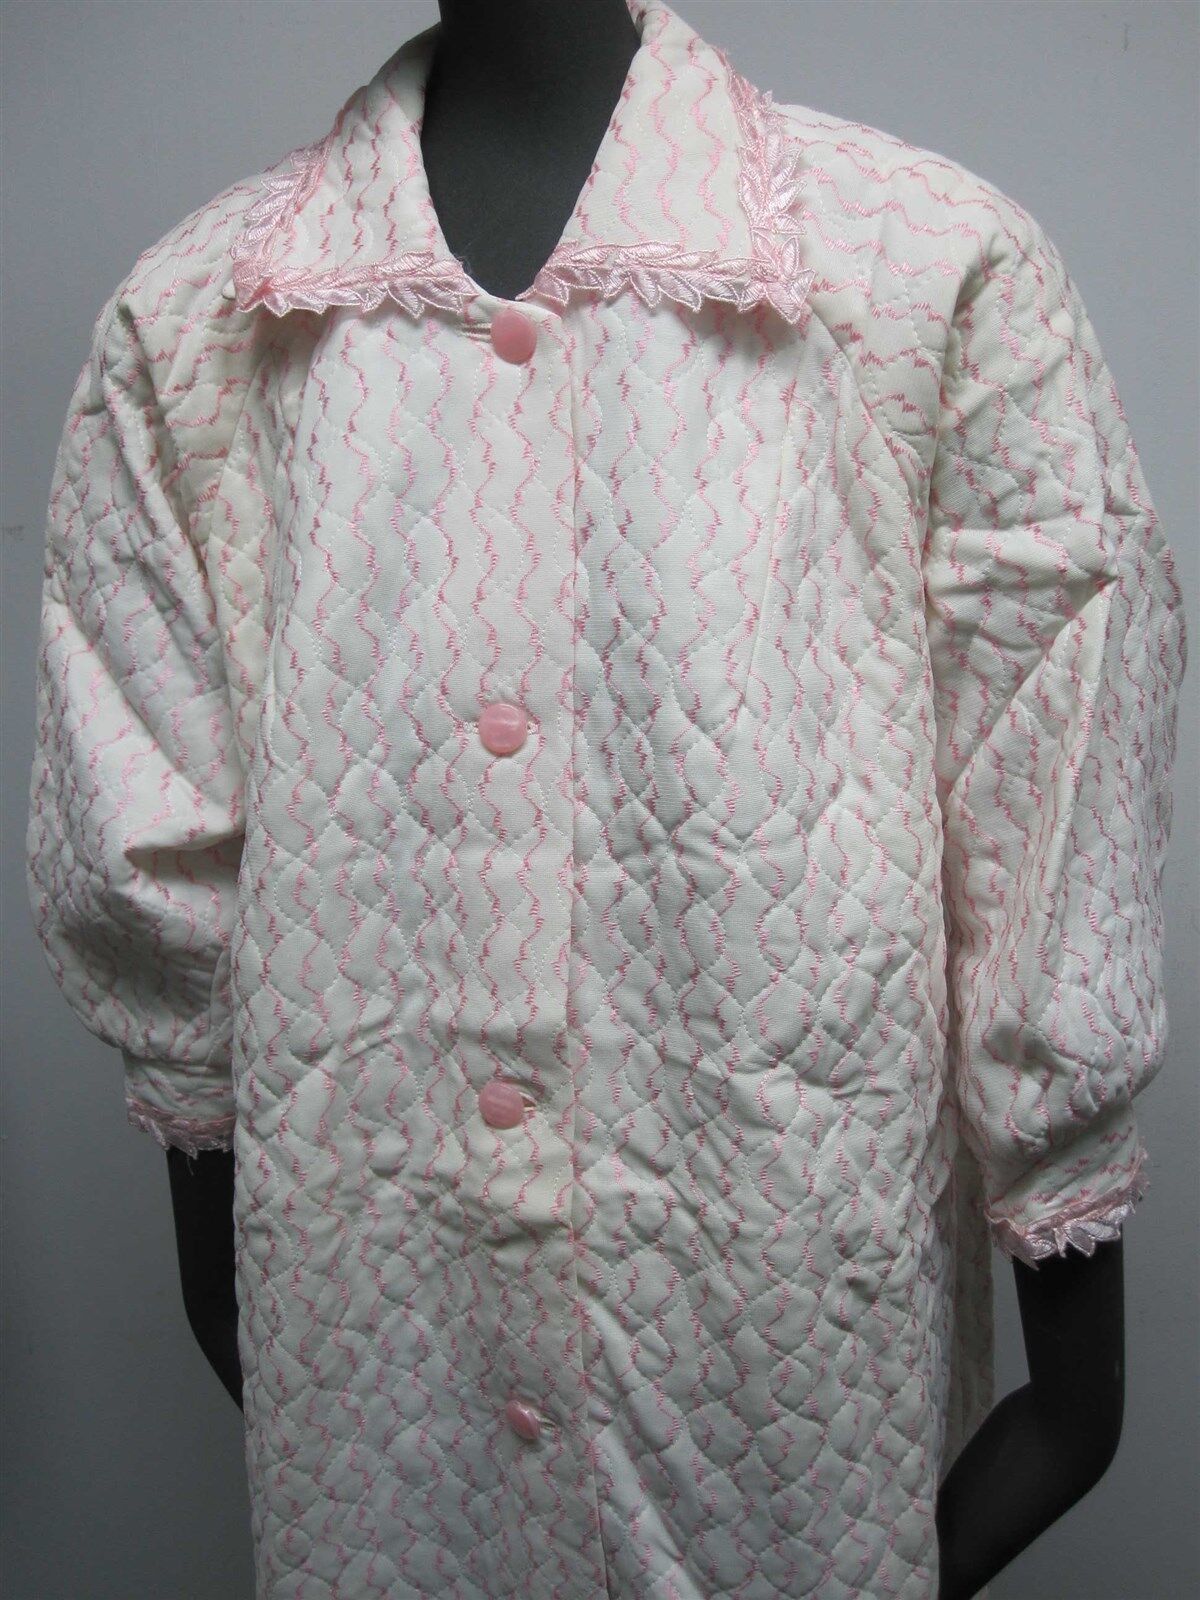 VTG 1950s WOMENS WHITE w PINK EMBROIDERED STRIPE QUILTED ACETATE BATHROBE SZ 14